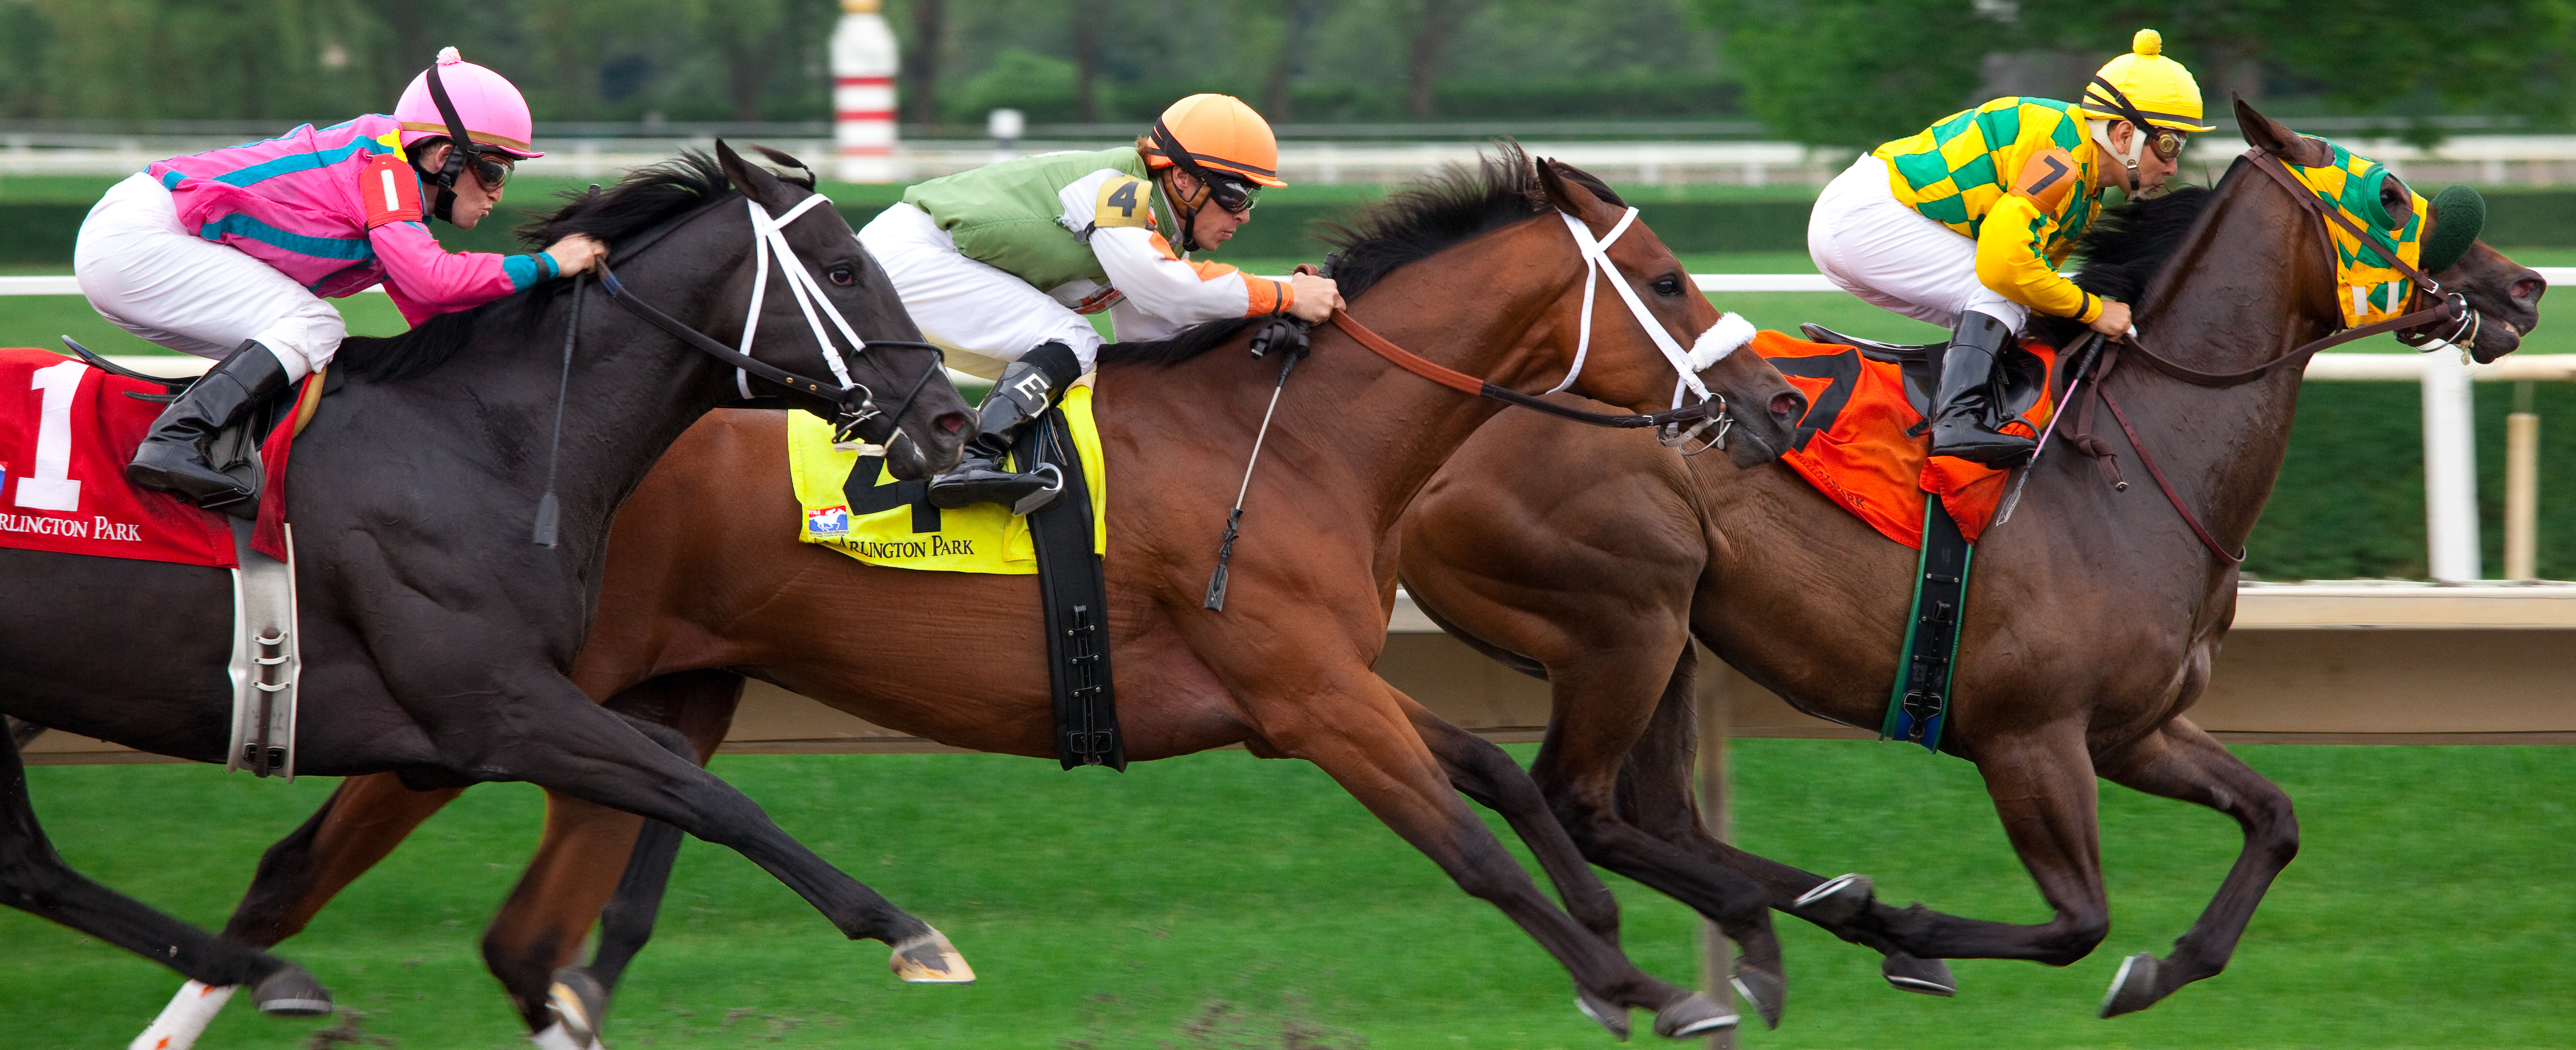 Review of the 2009 Kentucky Derby